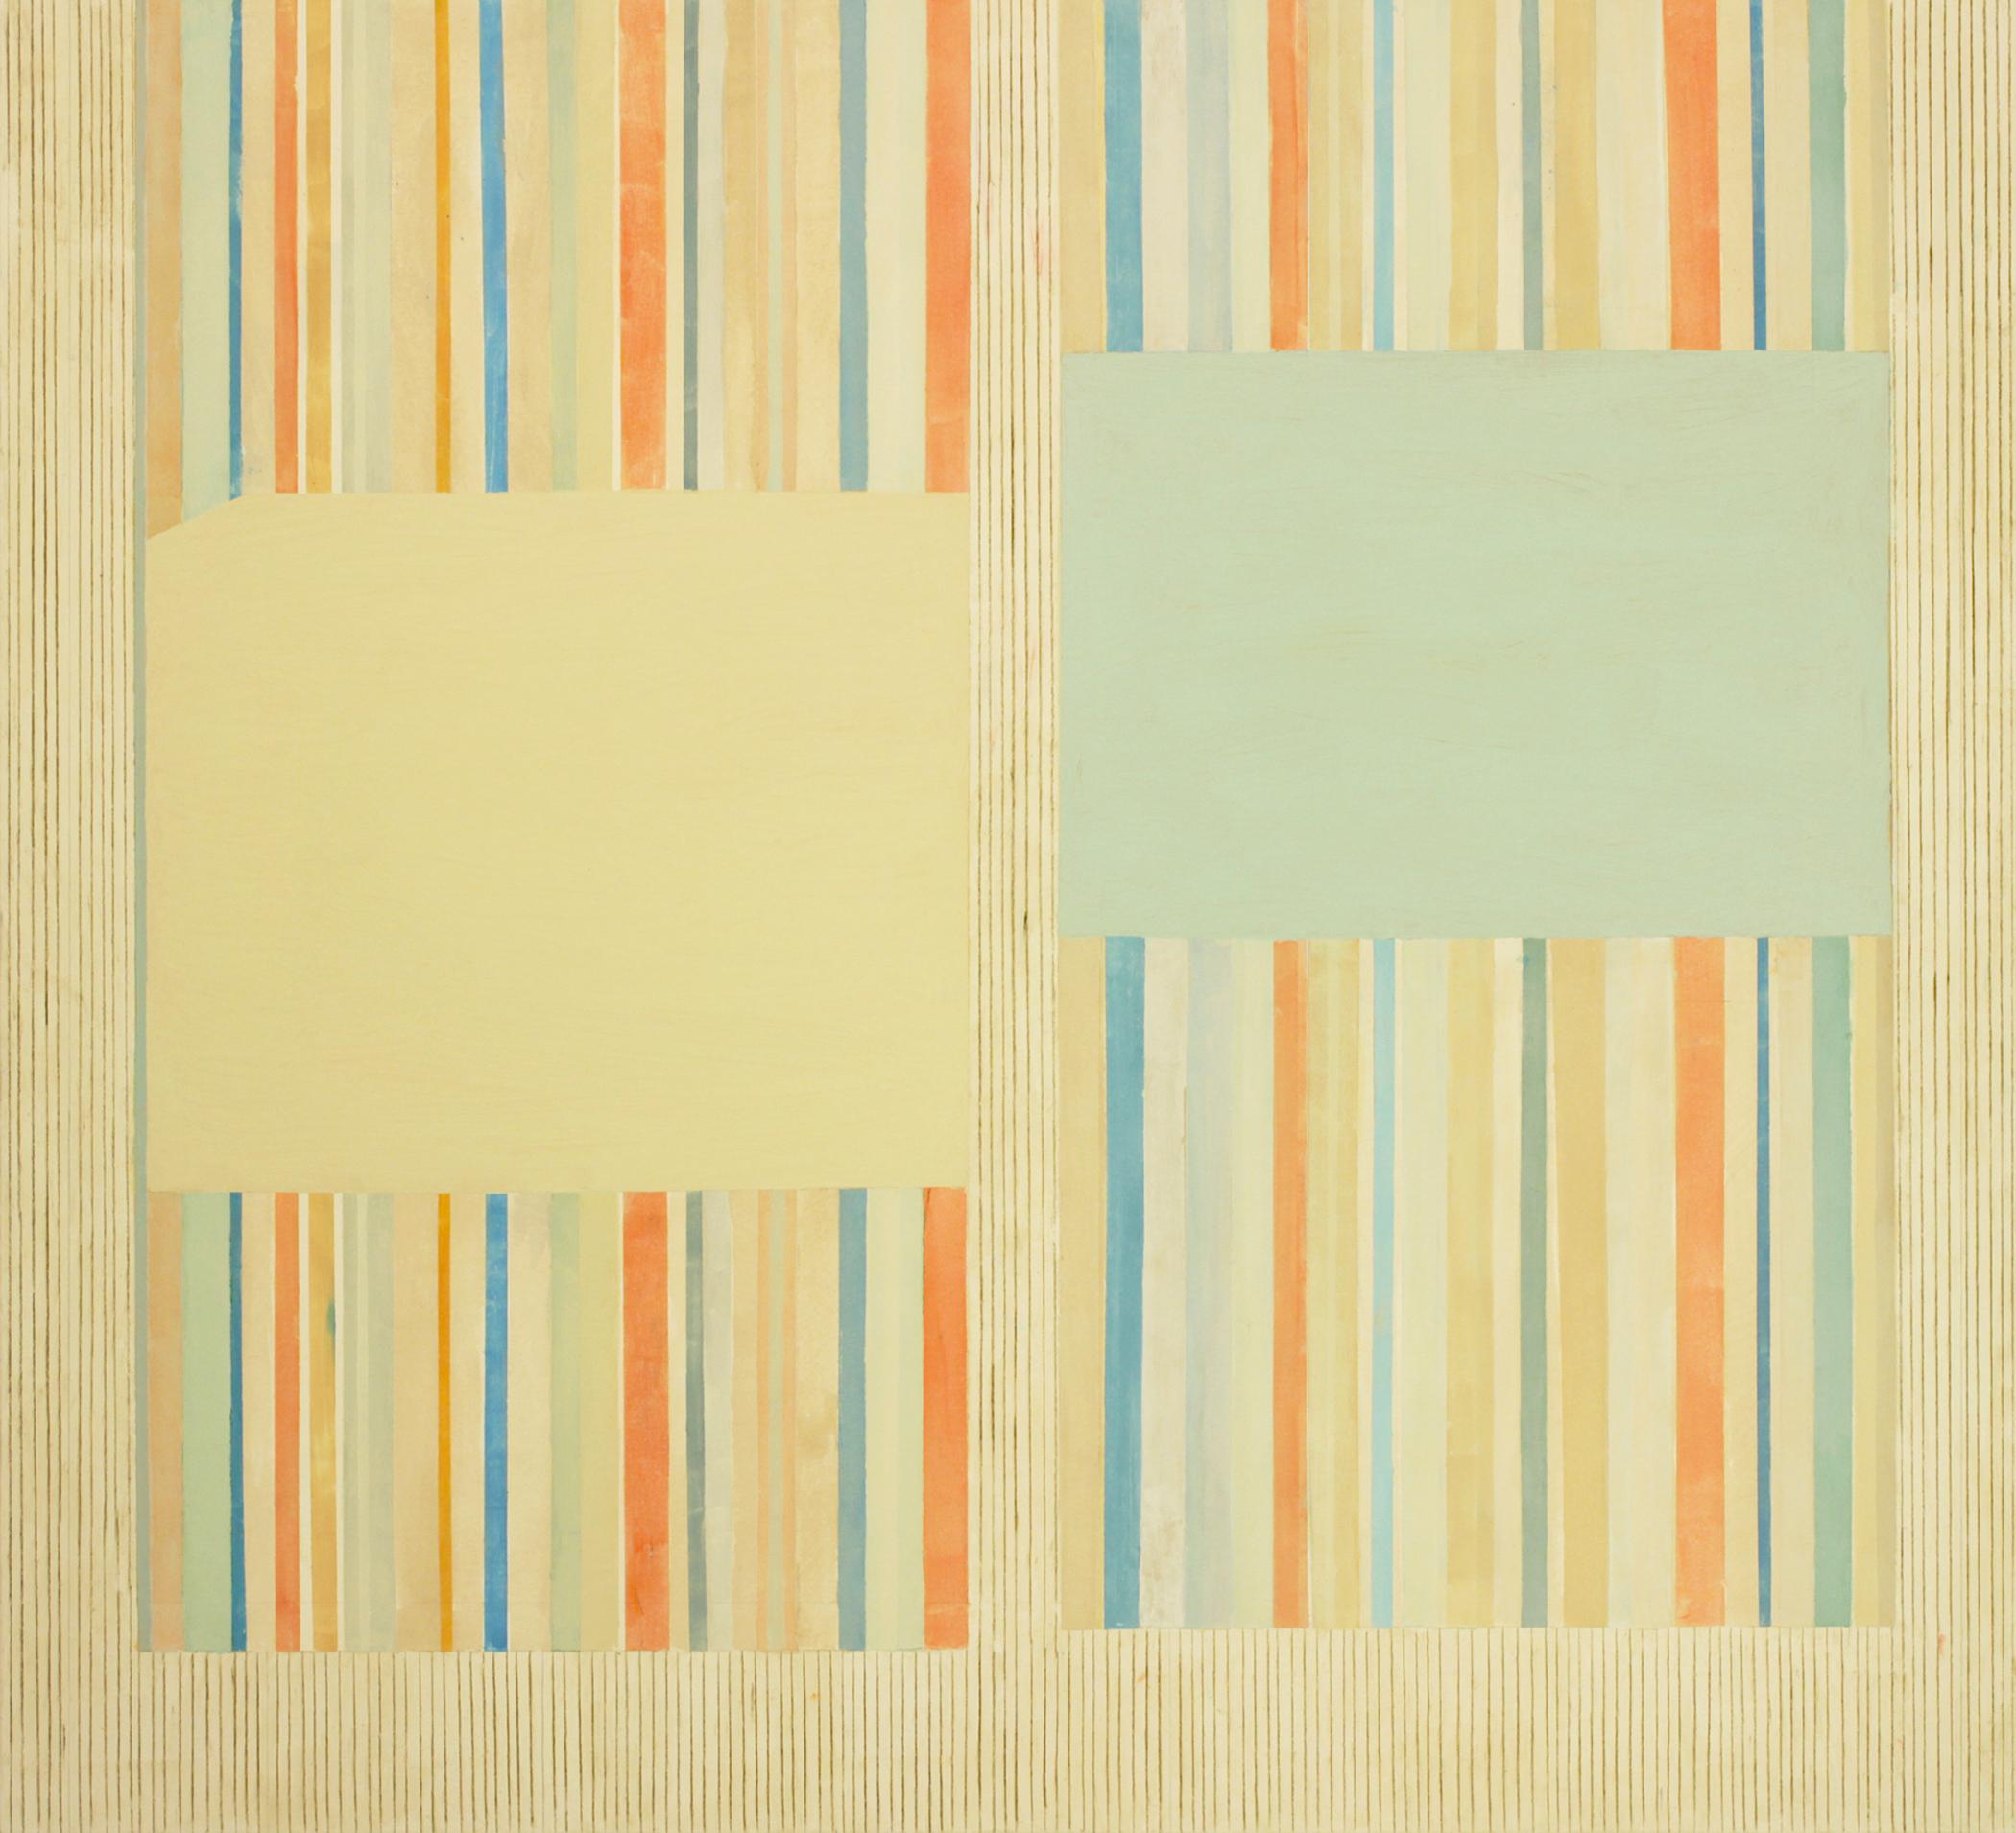 Primrose Gray, Abstract Painting, Beige, Gray Blue, Orange, Ivory Yellow Stripes